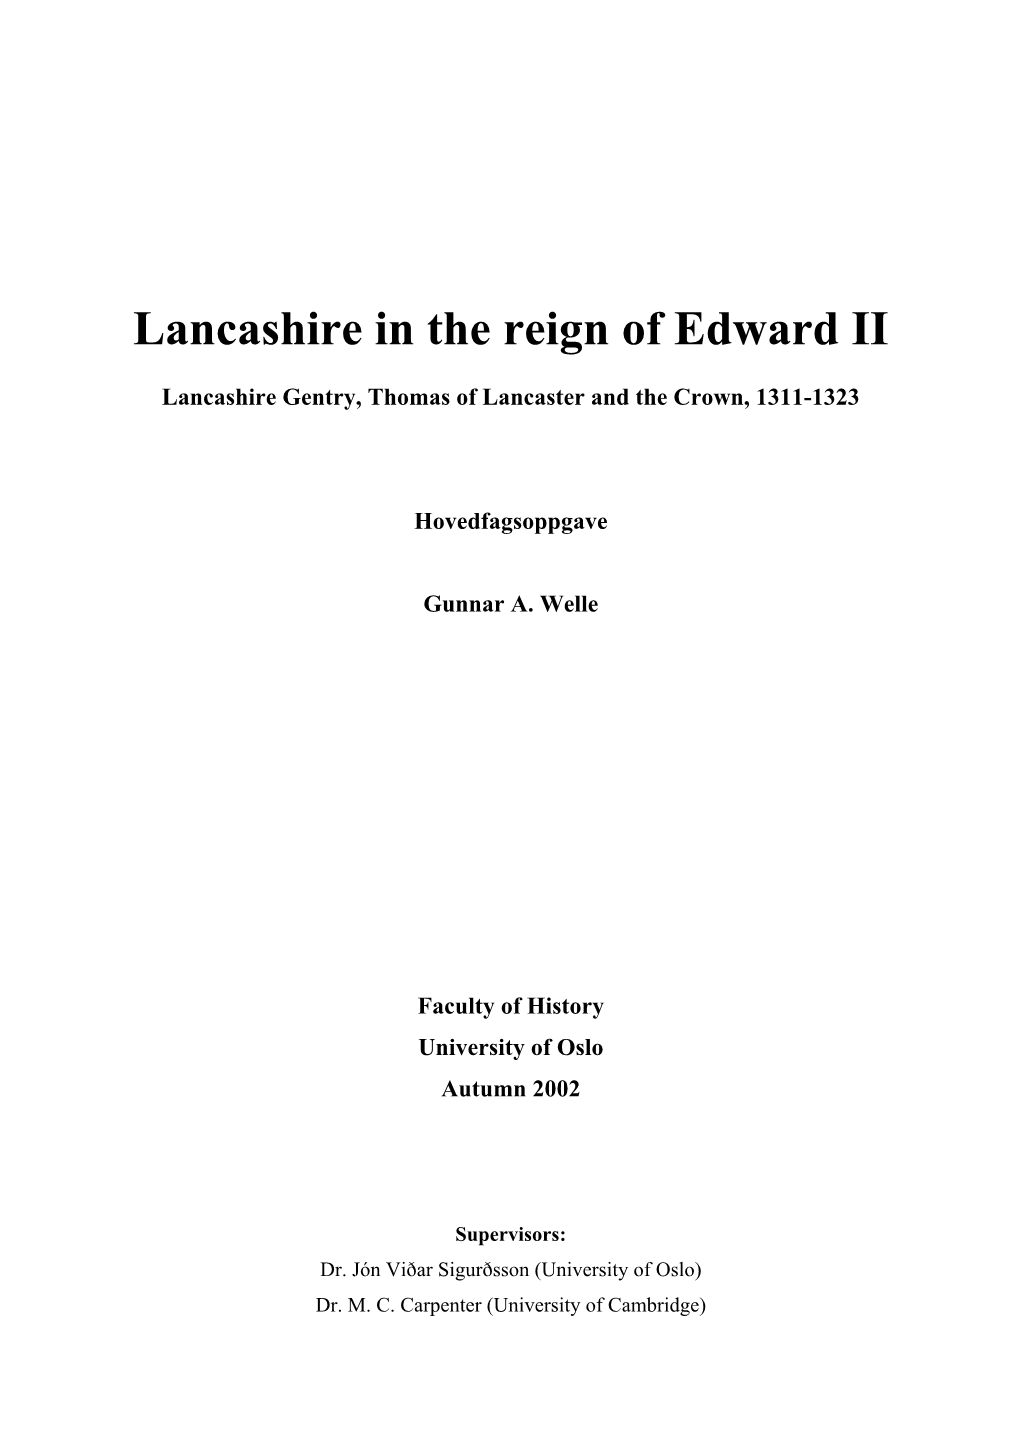 Lancashire in the Reign of Edward II